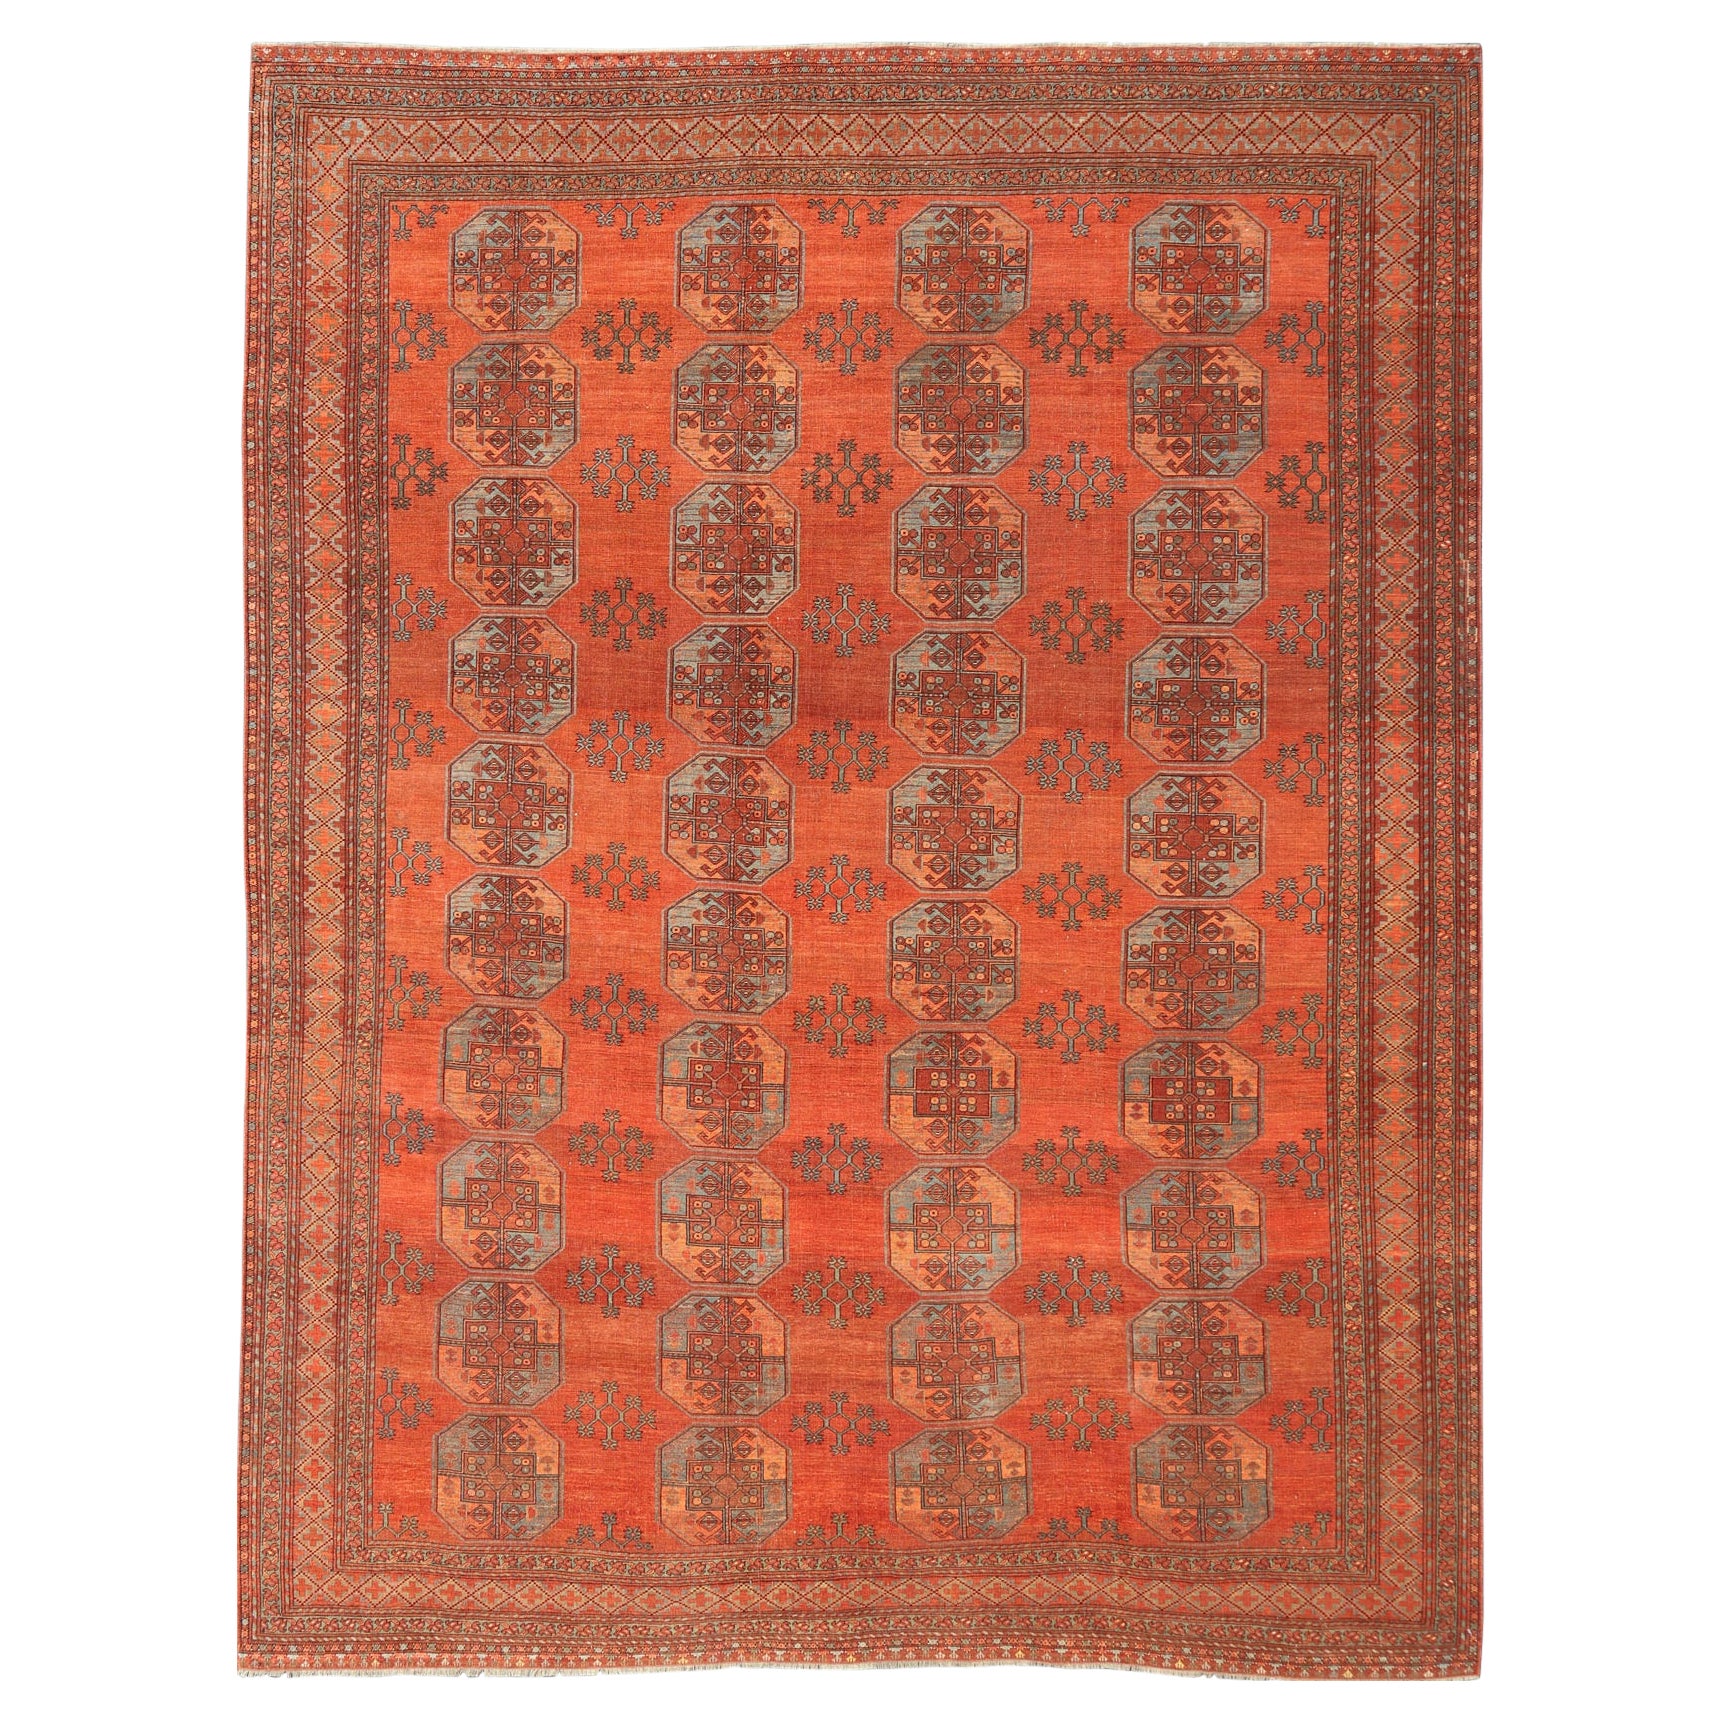 Large Turkomen Rug with All-Over Gul Bokhara Design